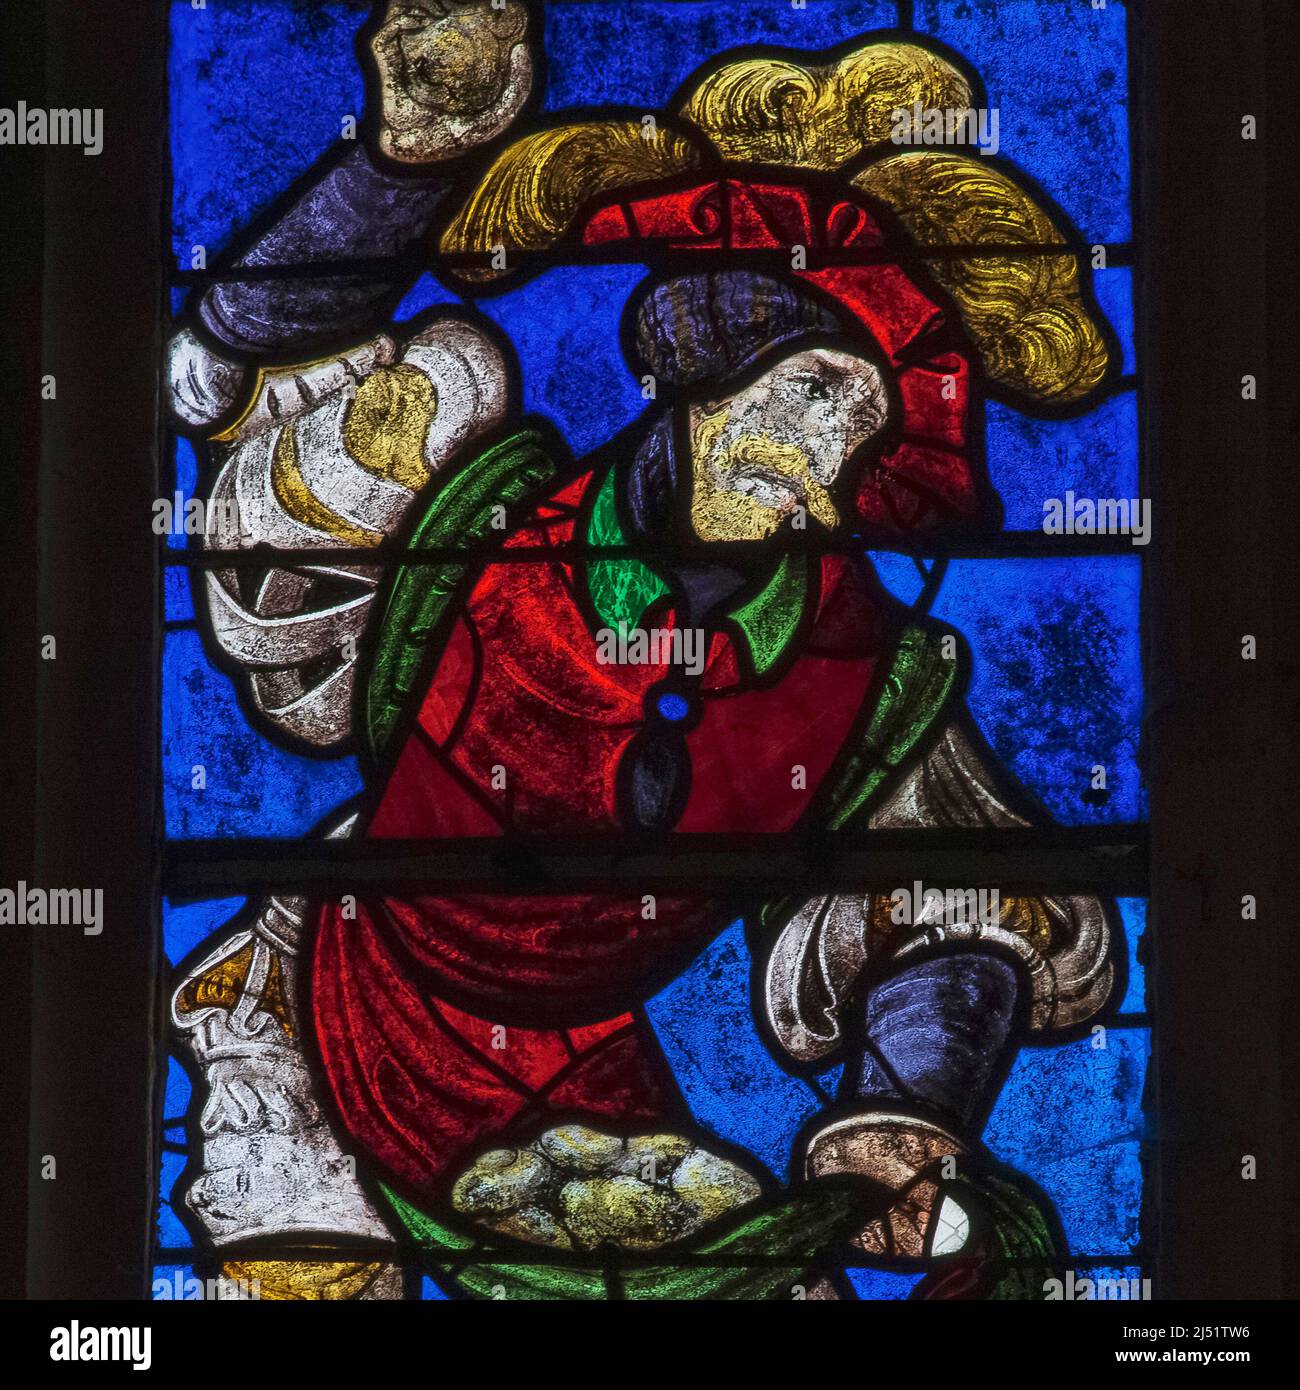 An executioner in colourful 1500s costume hurls stones at Christianity's first martyr, Saint Stephen, in a vivid square detail of early 1500s stained glass in the Église Saint-Rémi at Ceffonds, in the Champagne region of northeast France.  The colours are typical of Renaissance glass made in the workshops at Troyes, the historic regional capital. Stock Photo